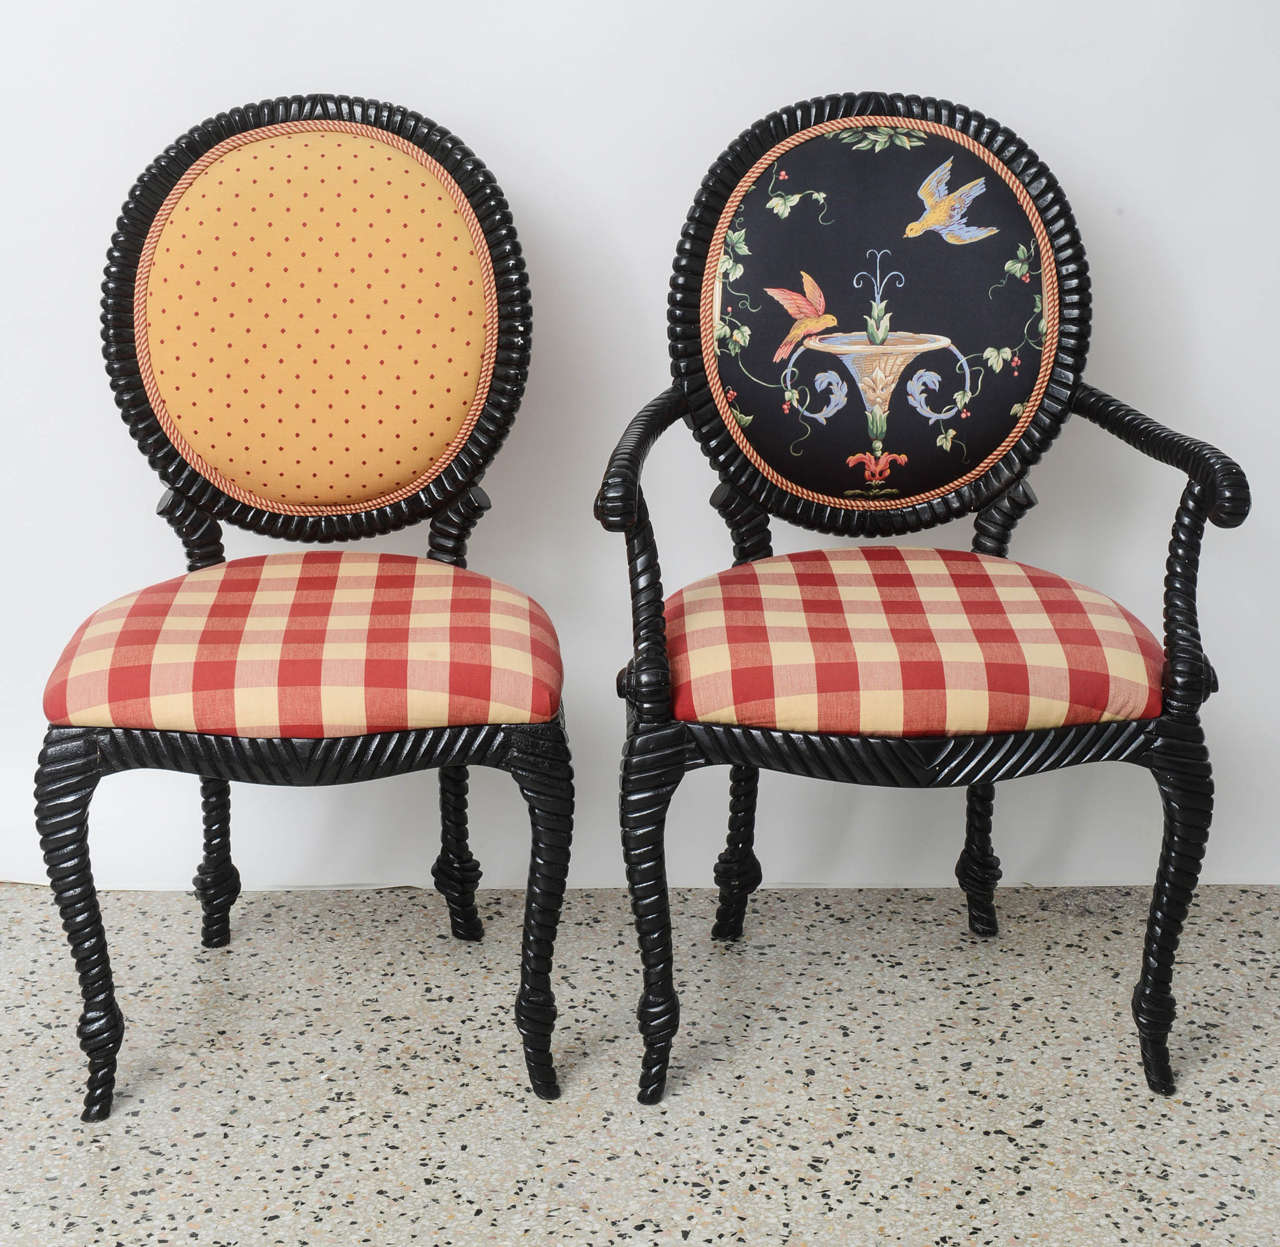 Fabric Set of Eight Dining Chairs & Table Hollywood-Regency Style, Rope/Tassel Motif